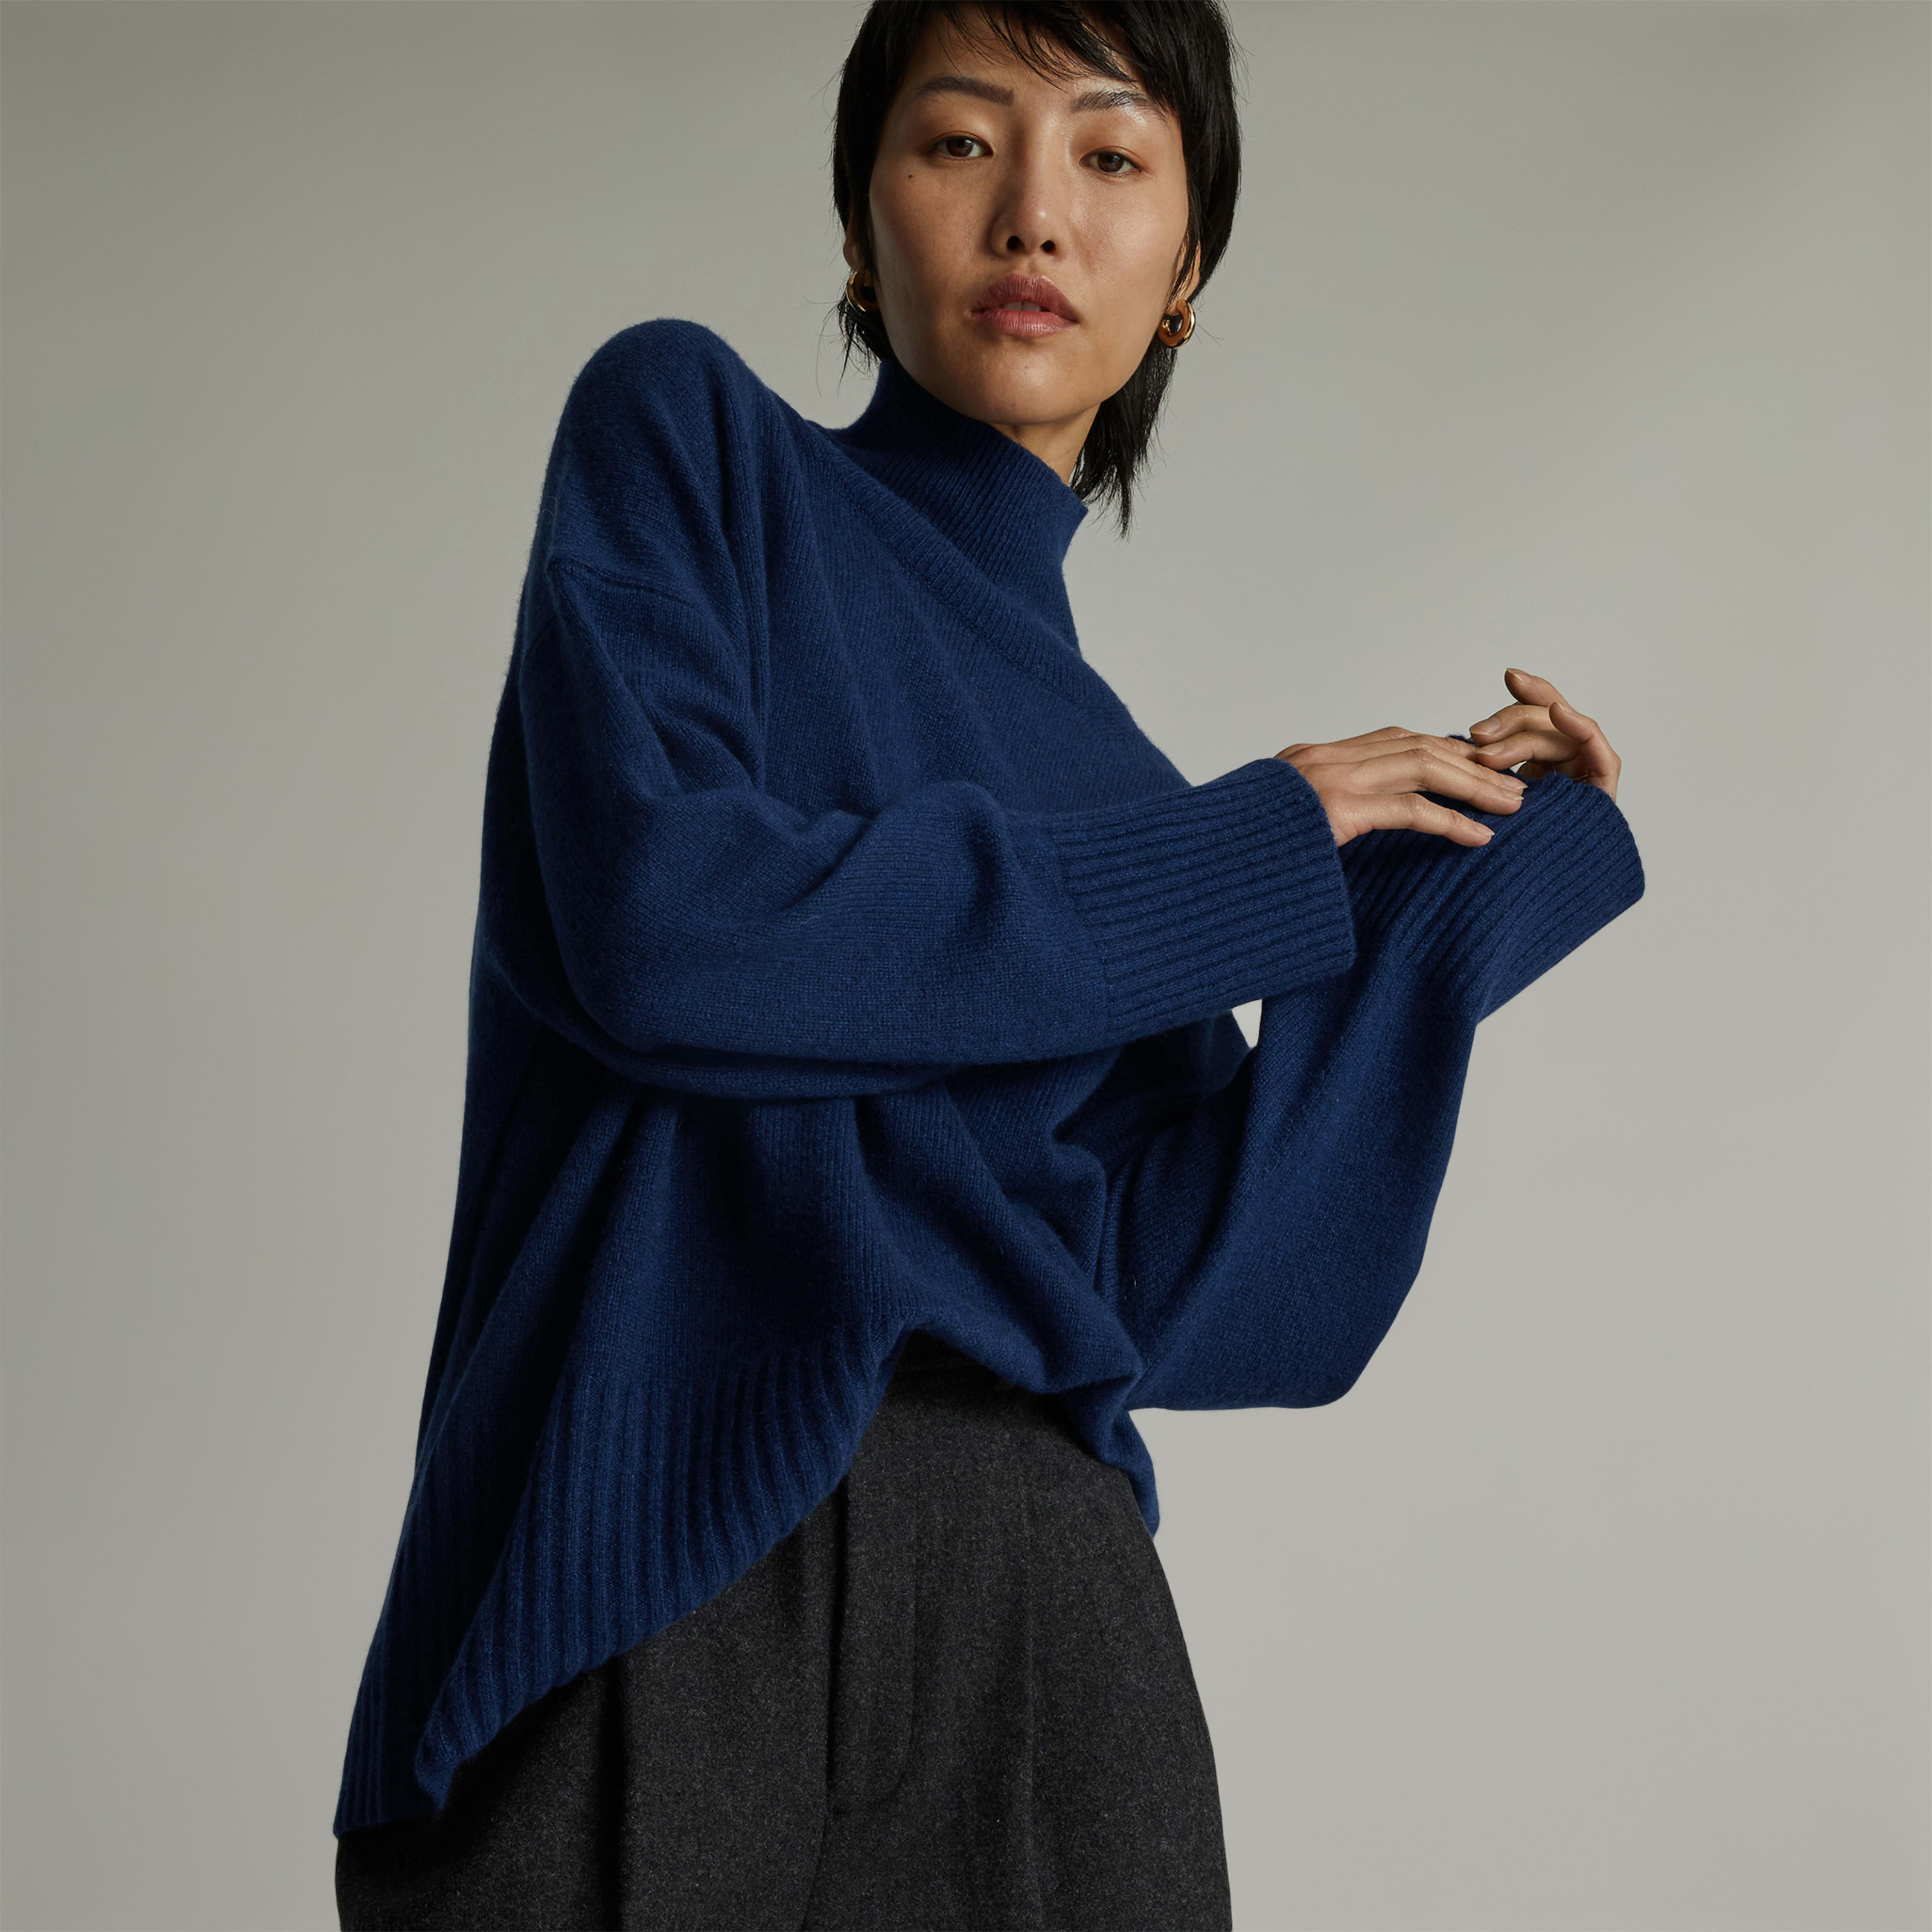 women's cashmere oversized turtleneck sweater by everlane in bright navy, size xs